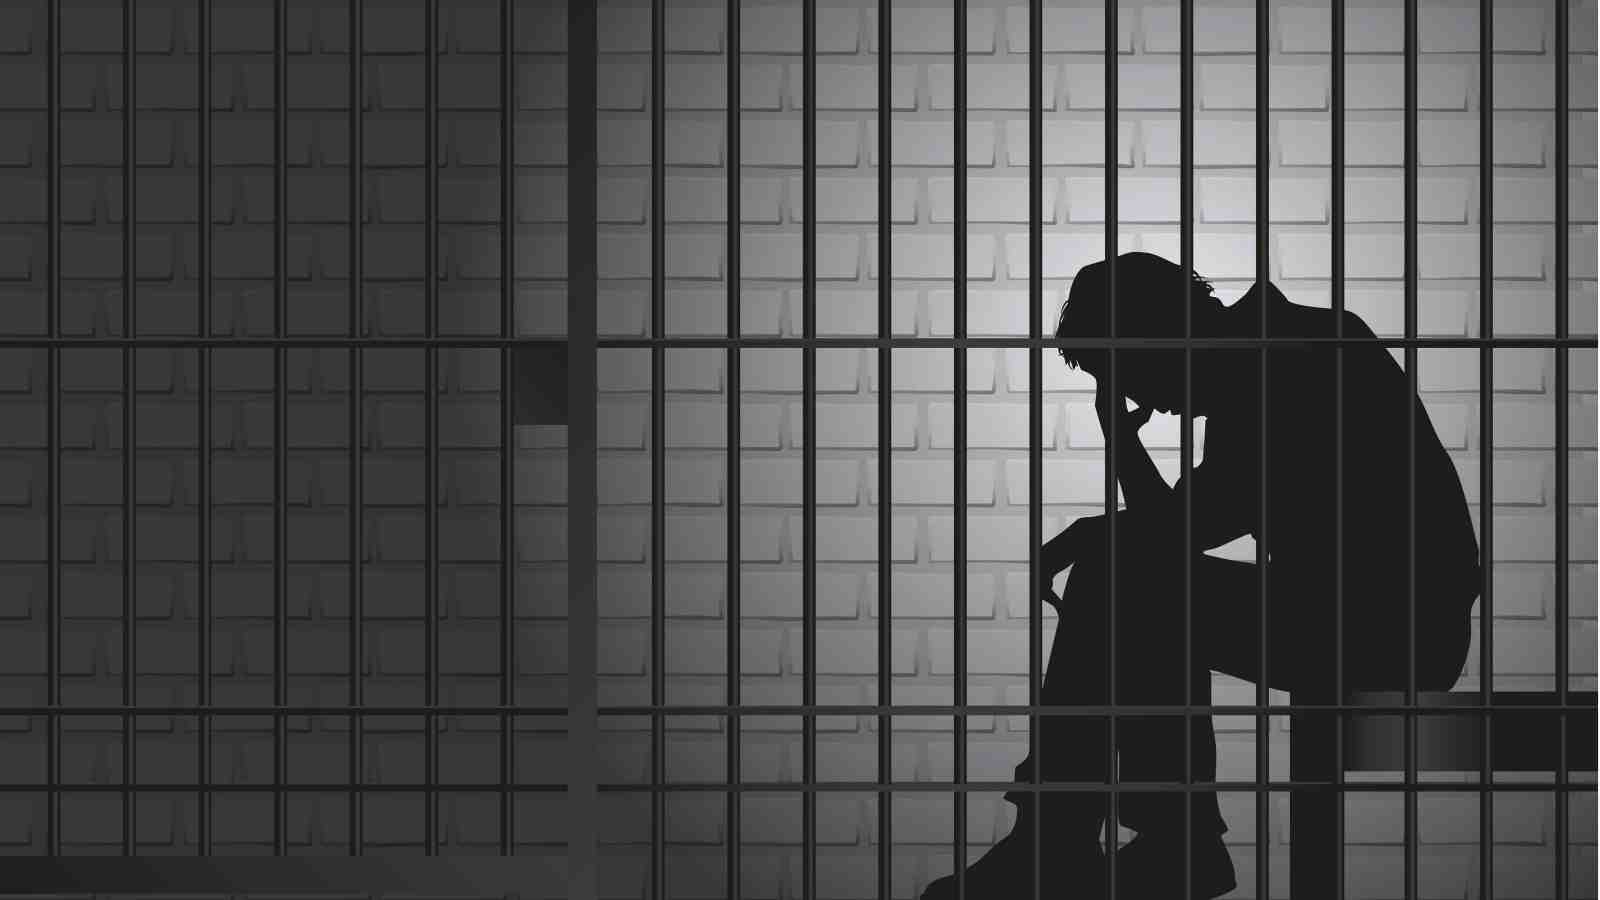 Silhouette of a prisoner behind bars.